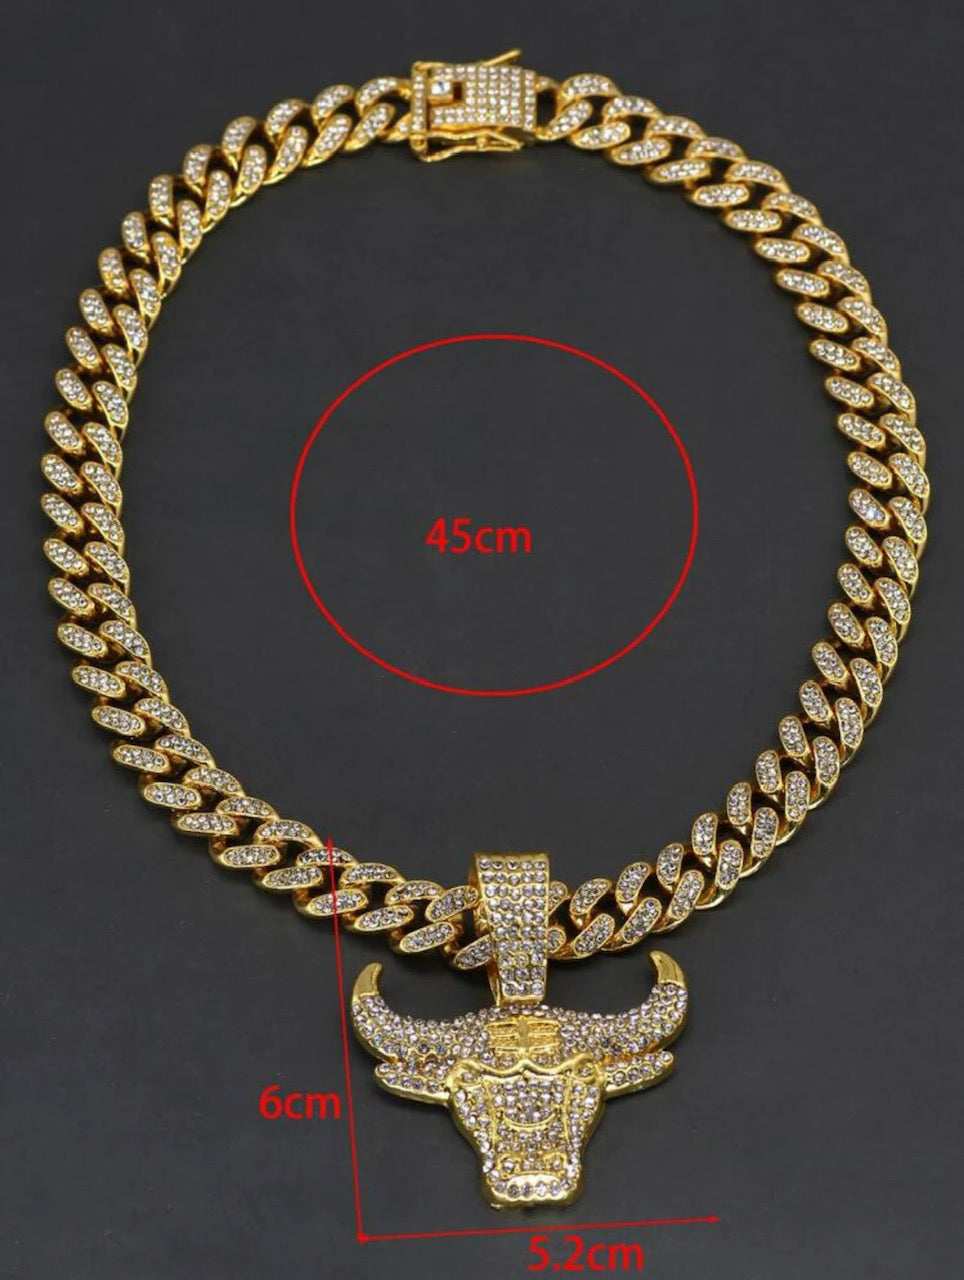 Cuban Chain Rhinestone Necklace for Men with Bull Pendant